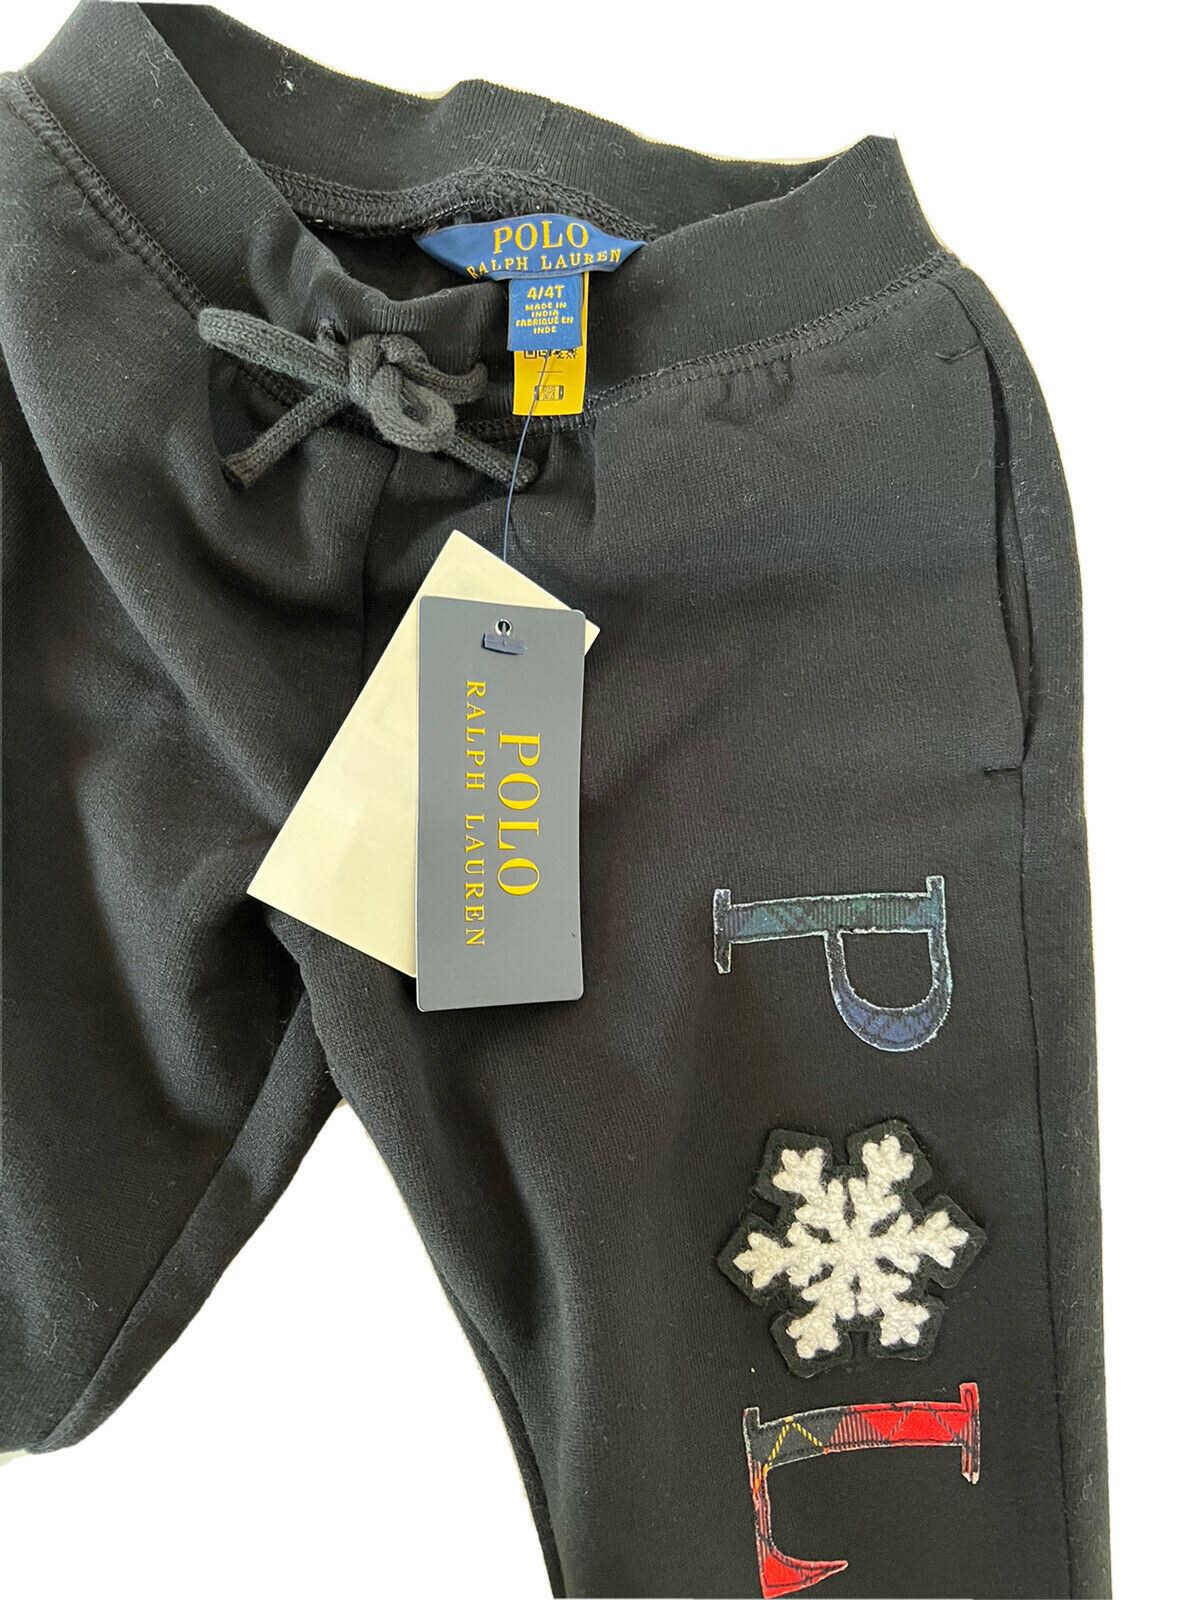 NWT Polo Ralph Lauren Boy's Black Snow Flake Casual Pant 6 Made in India